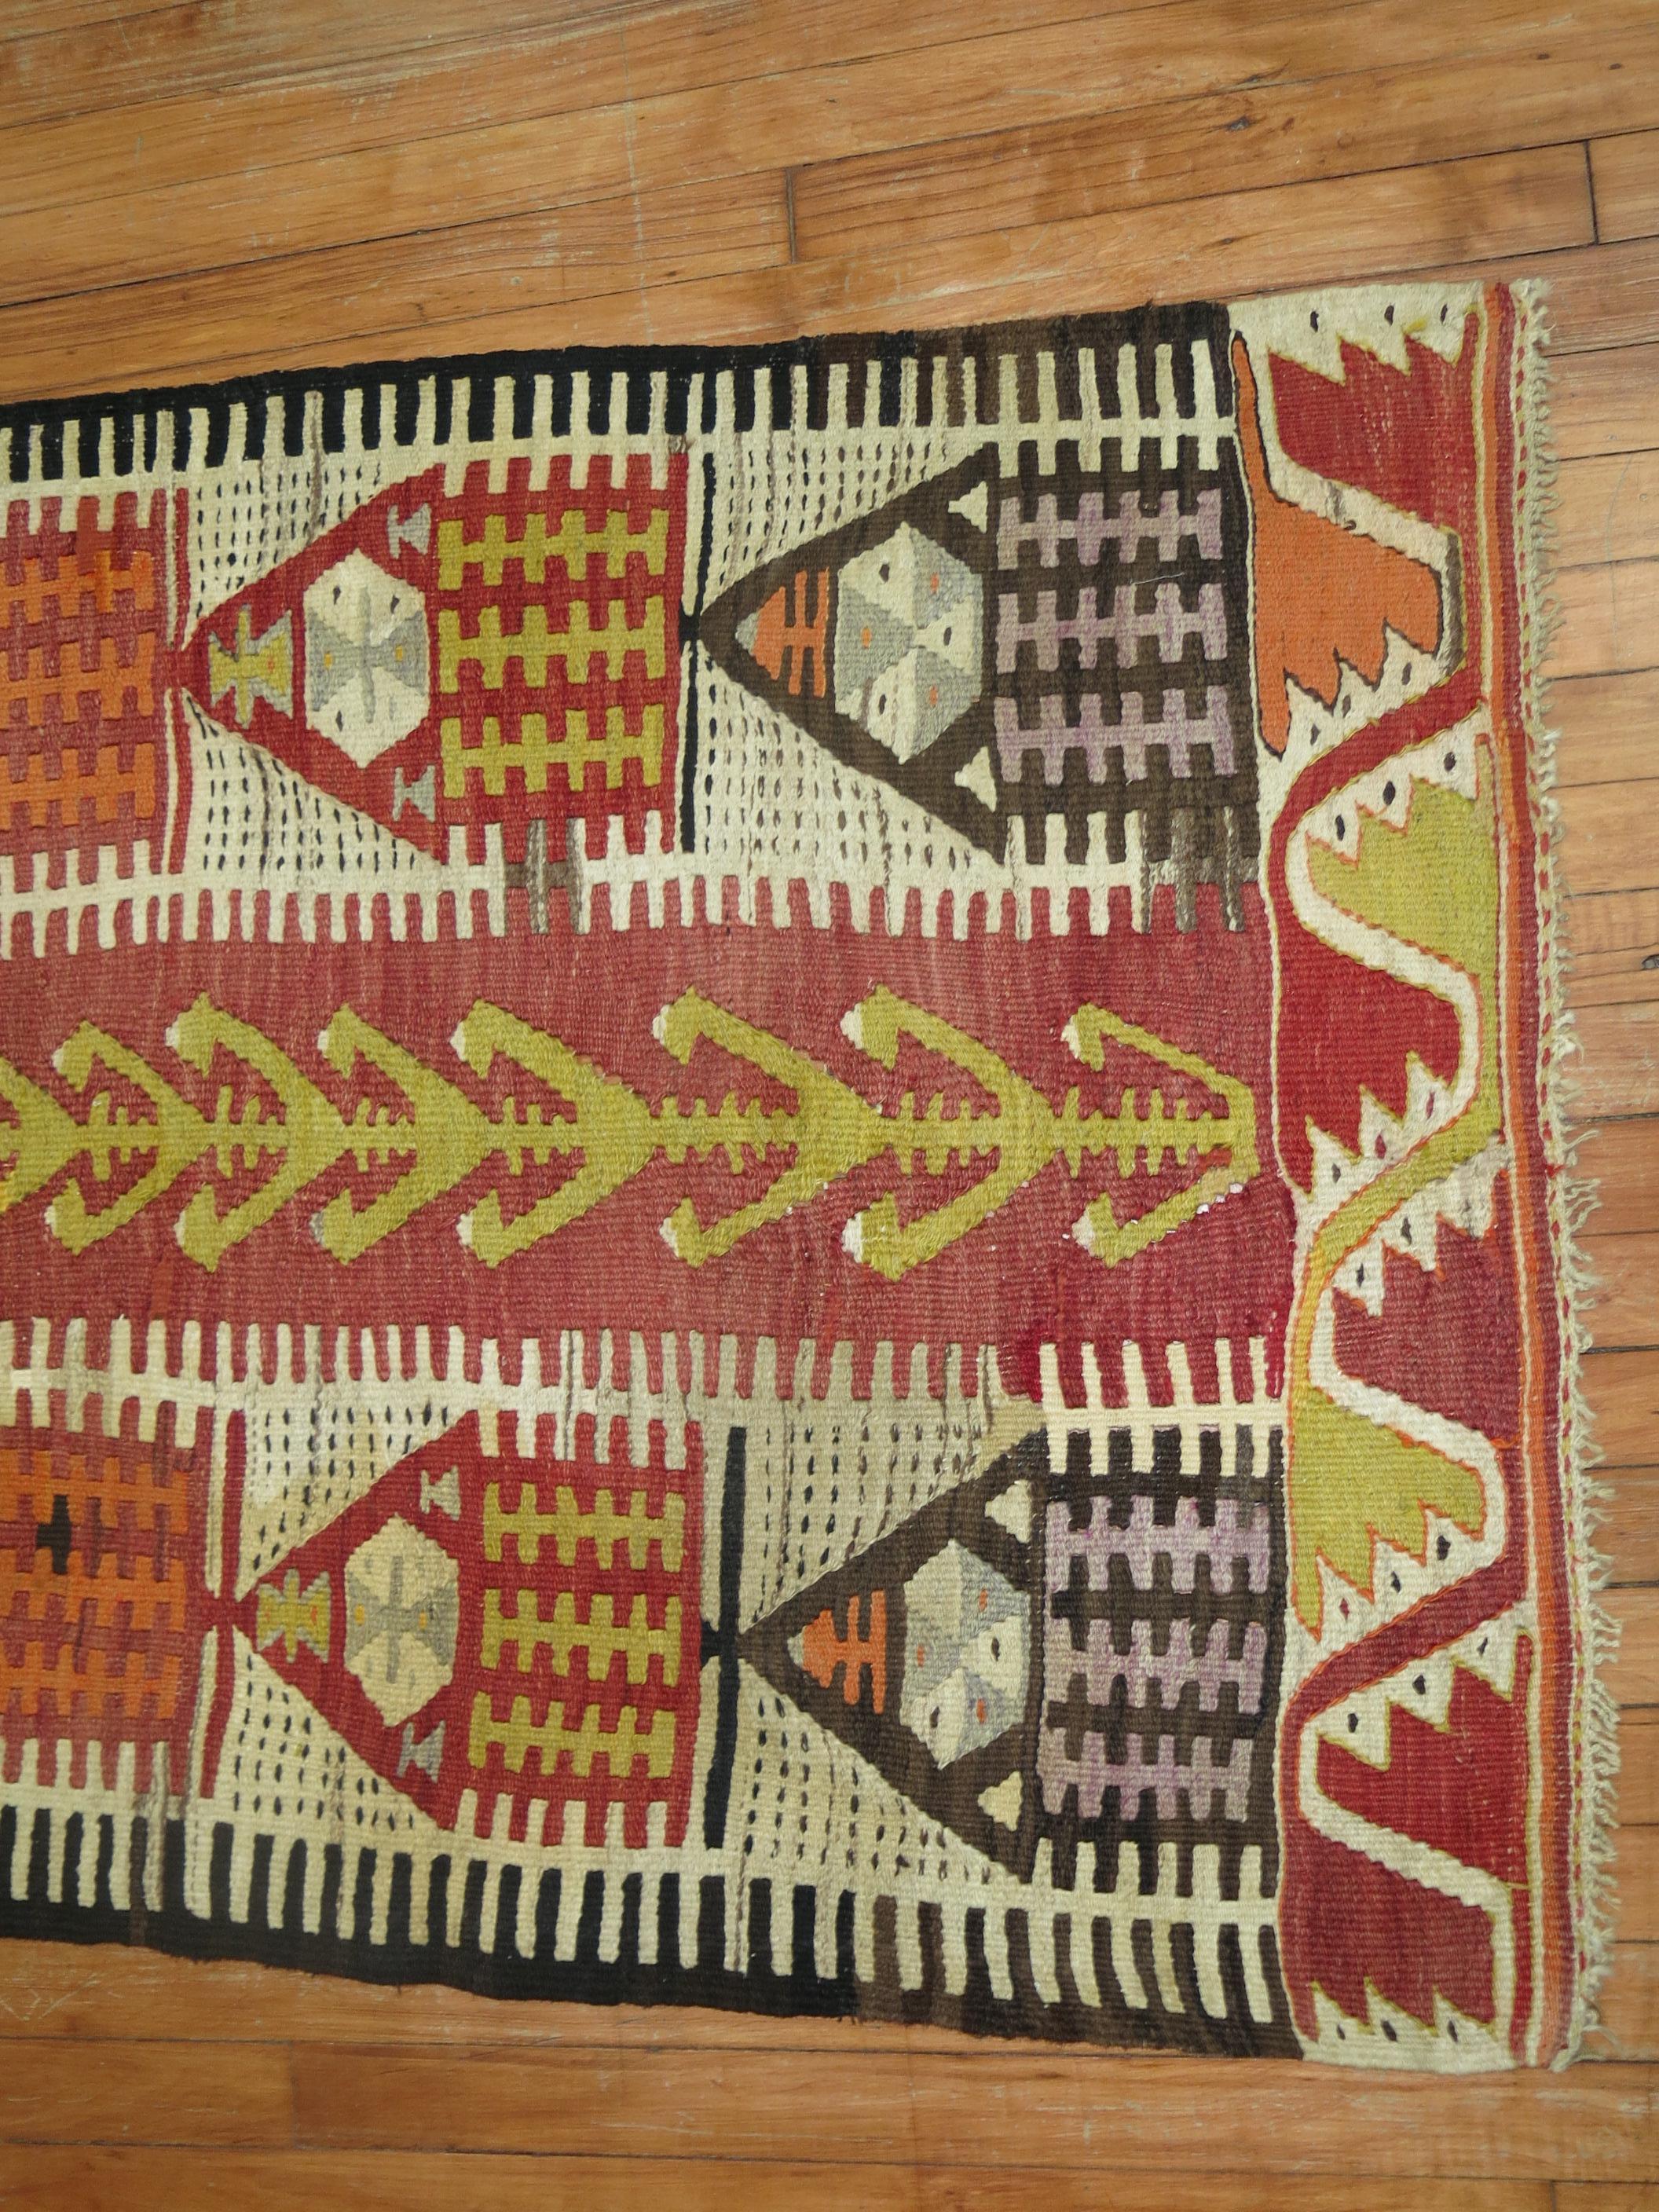 Hand-Woven Throw Size 20th Century Hand Knotted Turkish Prayer Kilim Flat-Weave For Sale